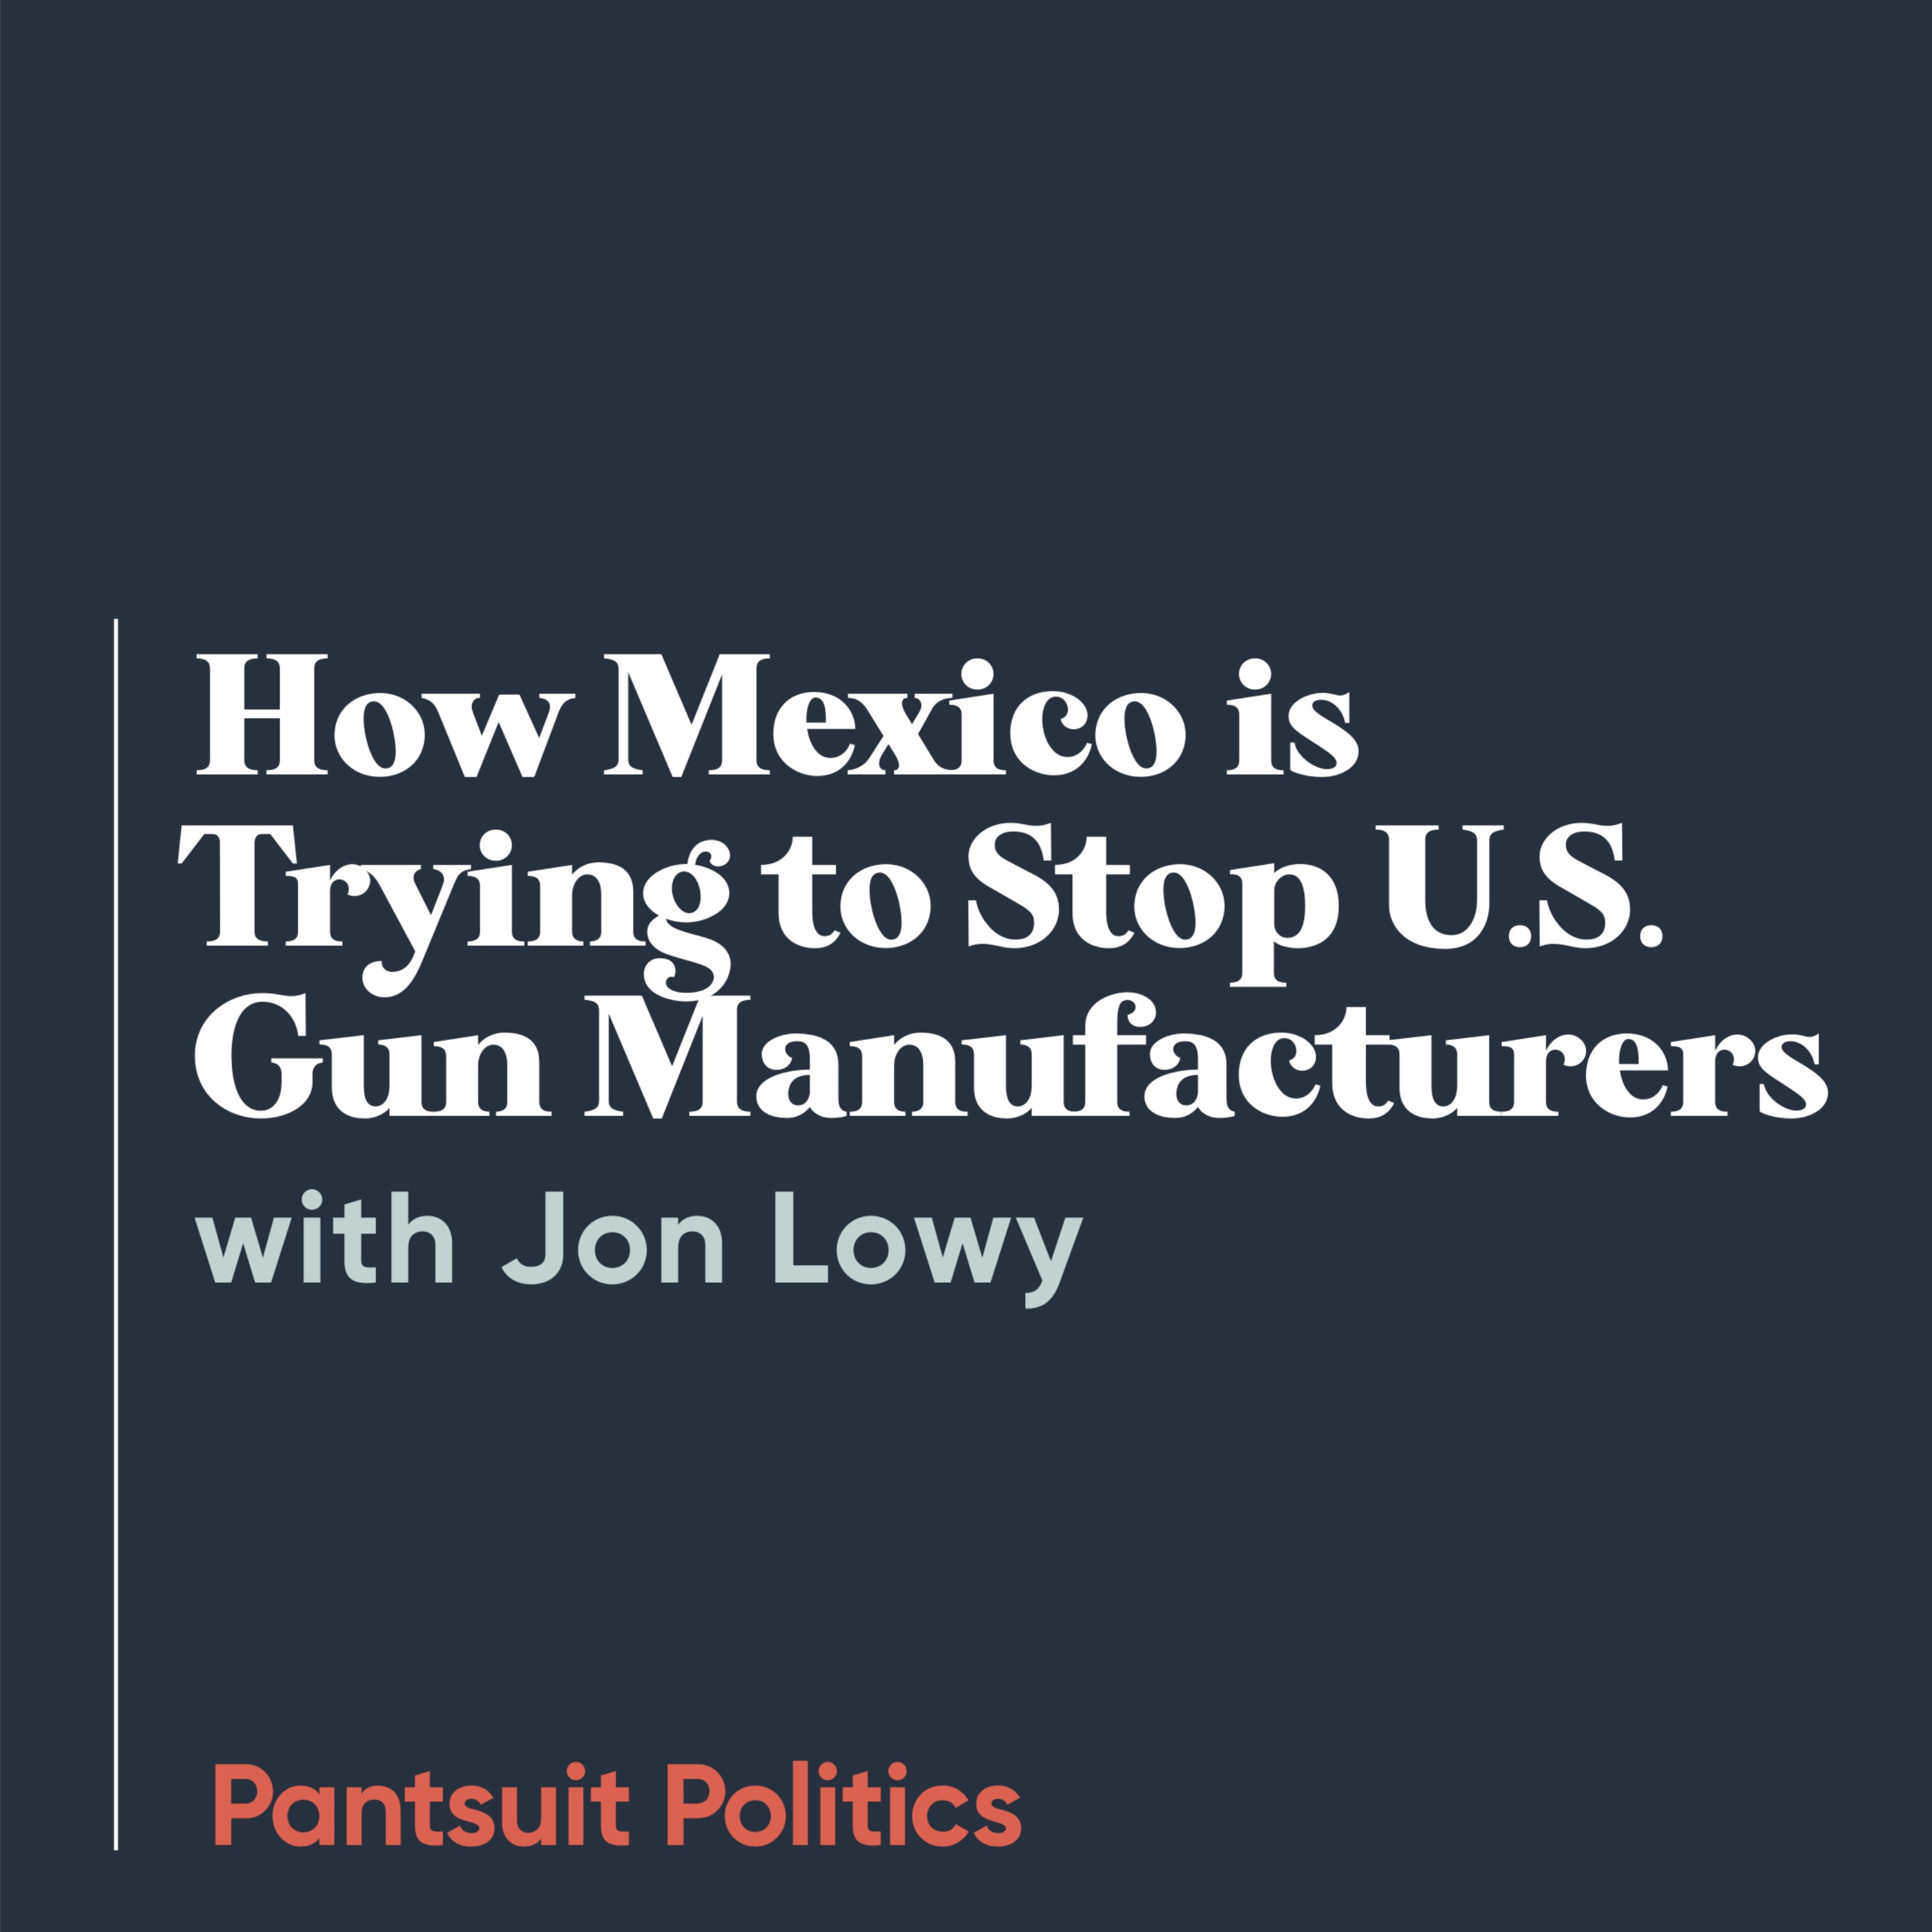 How Mexico is Trying to Stop U.S. Gun Manufacturers with Jon Lowy